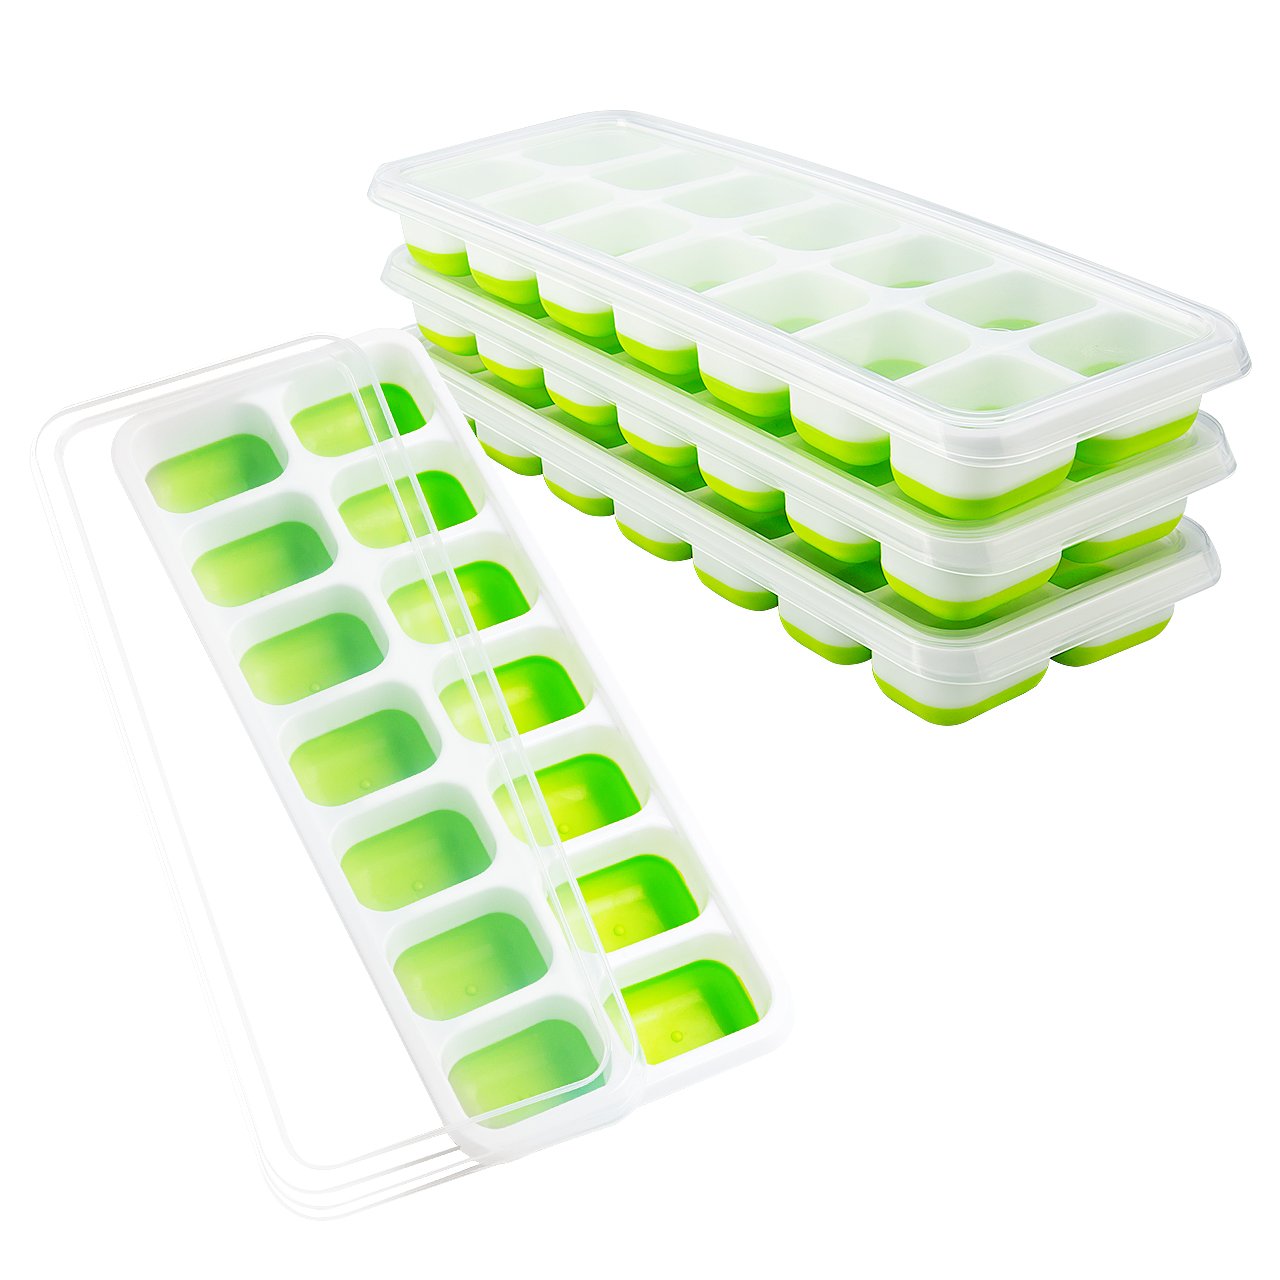 OMorc Silicone Ice Cube Trays With Lids, 4-Pack